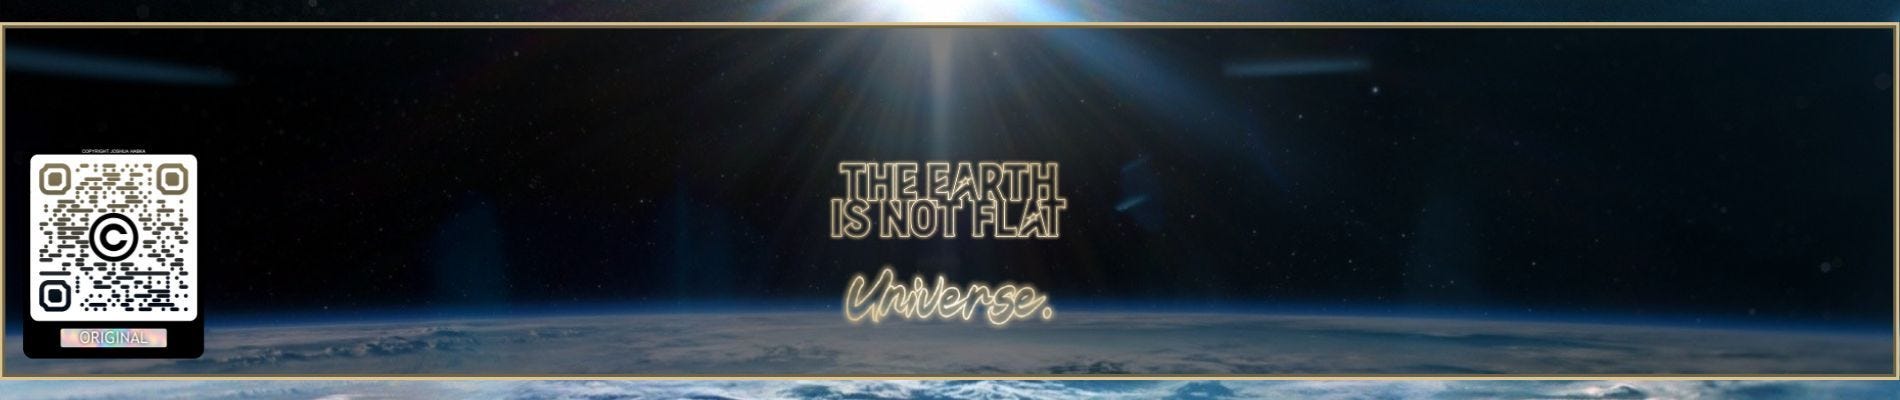 The Earth Is Not Flat.